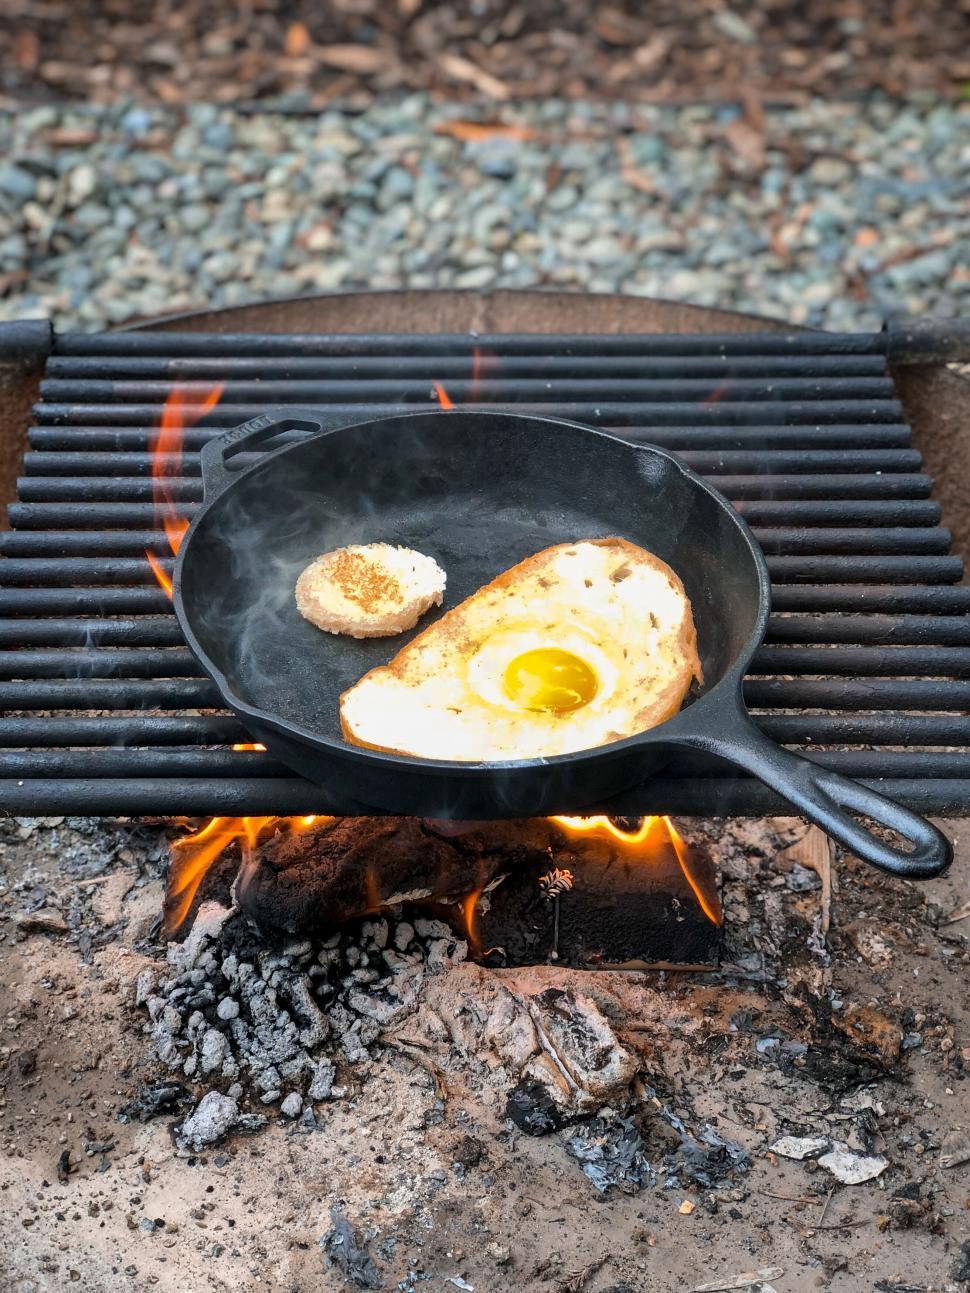 Free Image of Outdoor cooking with fried egg on skillet 